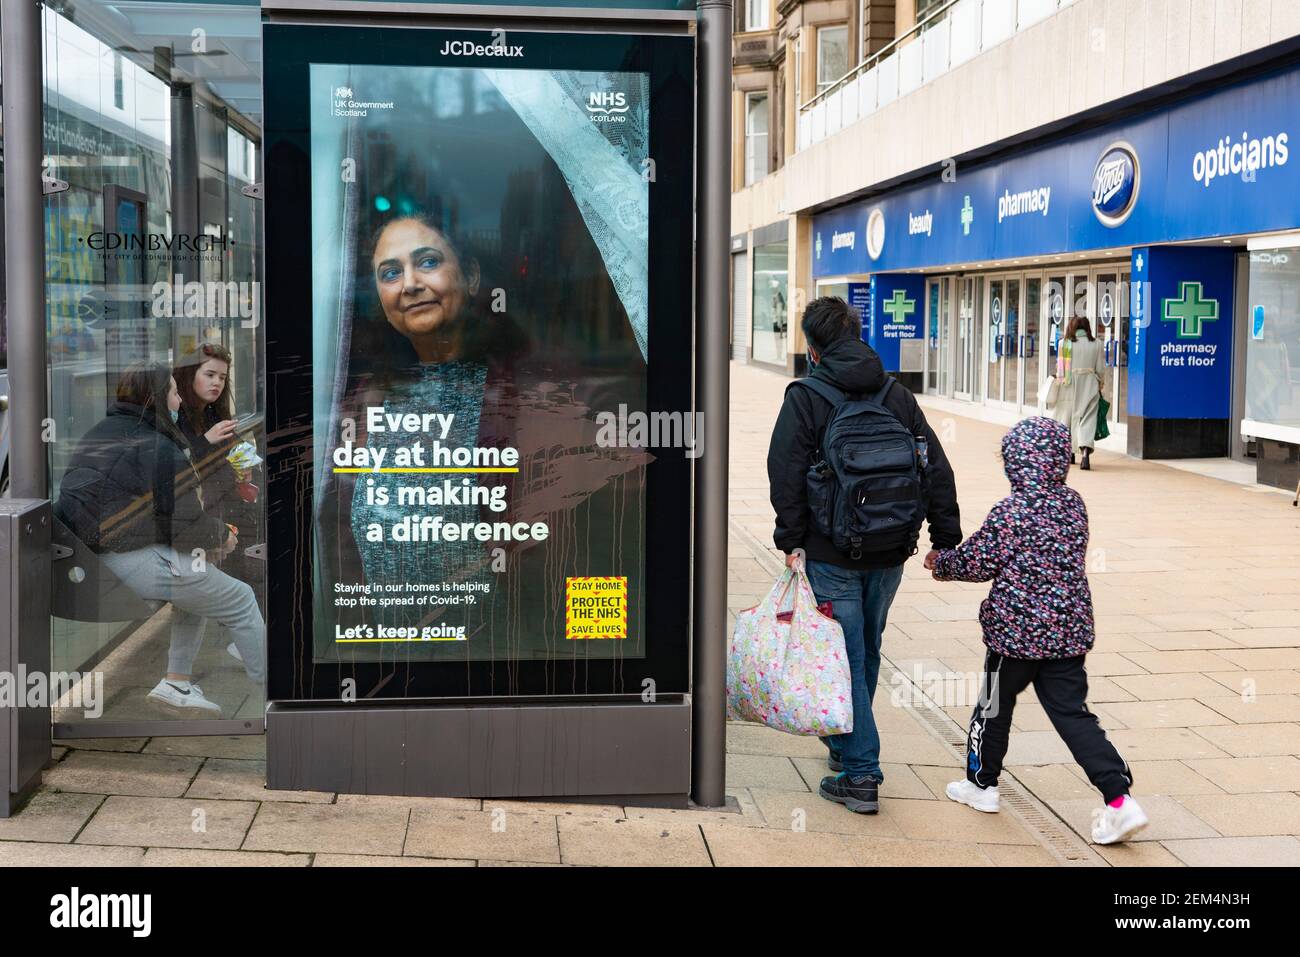 Edinburgh, Scotland, UK. 24 Feb 2021. As the UK and Scottish Governments outline rough timelines to ease the current lockdown , retailers and businesses remain close in UK city centres. Normally busy Princes Street remains eerily deserted with virtually all shops closed. Pic; New advertising campaign by Government to ask public to stay at home. Iain Masterton/Alamy Live News Stock Photo